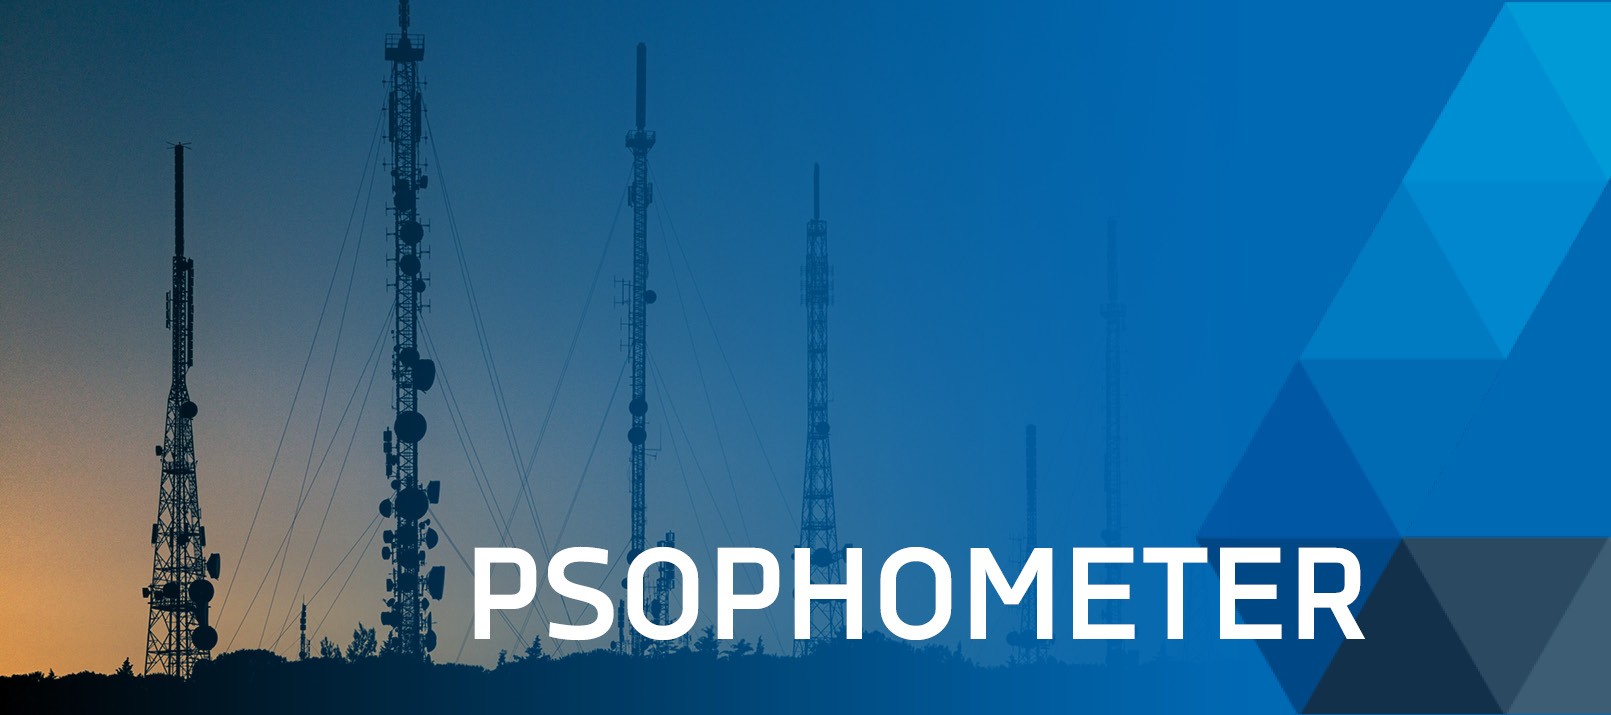 Psophometer used in telecommunication